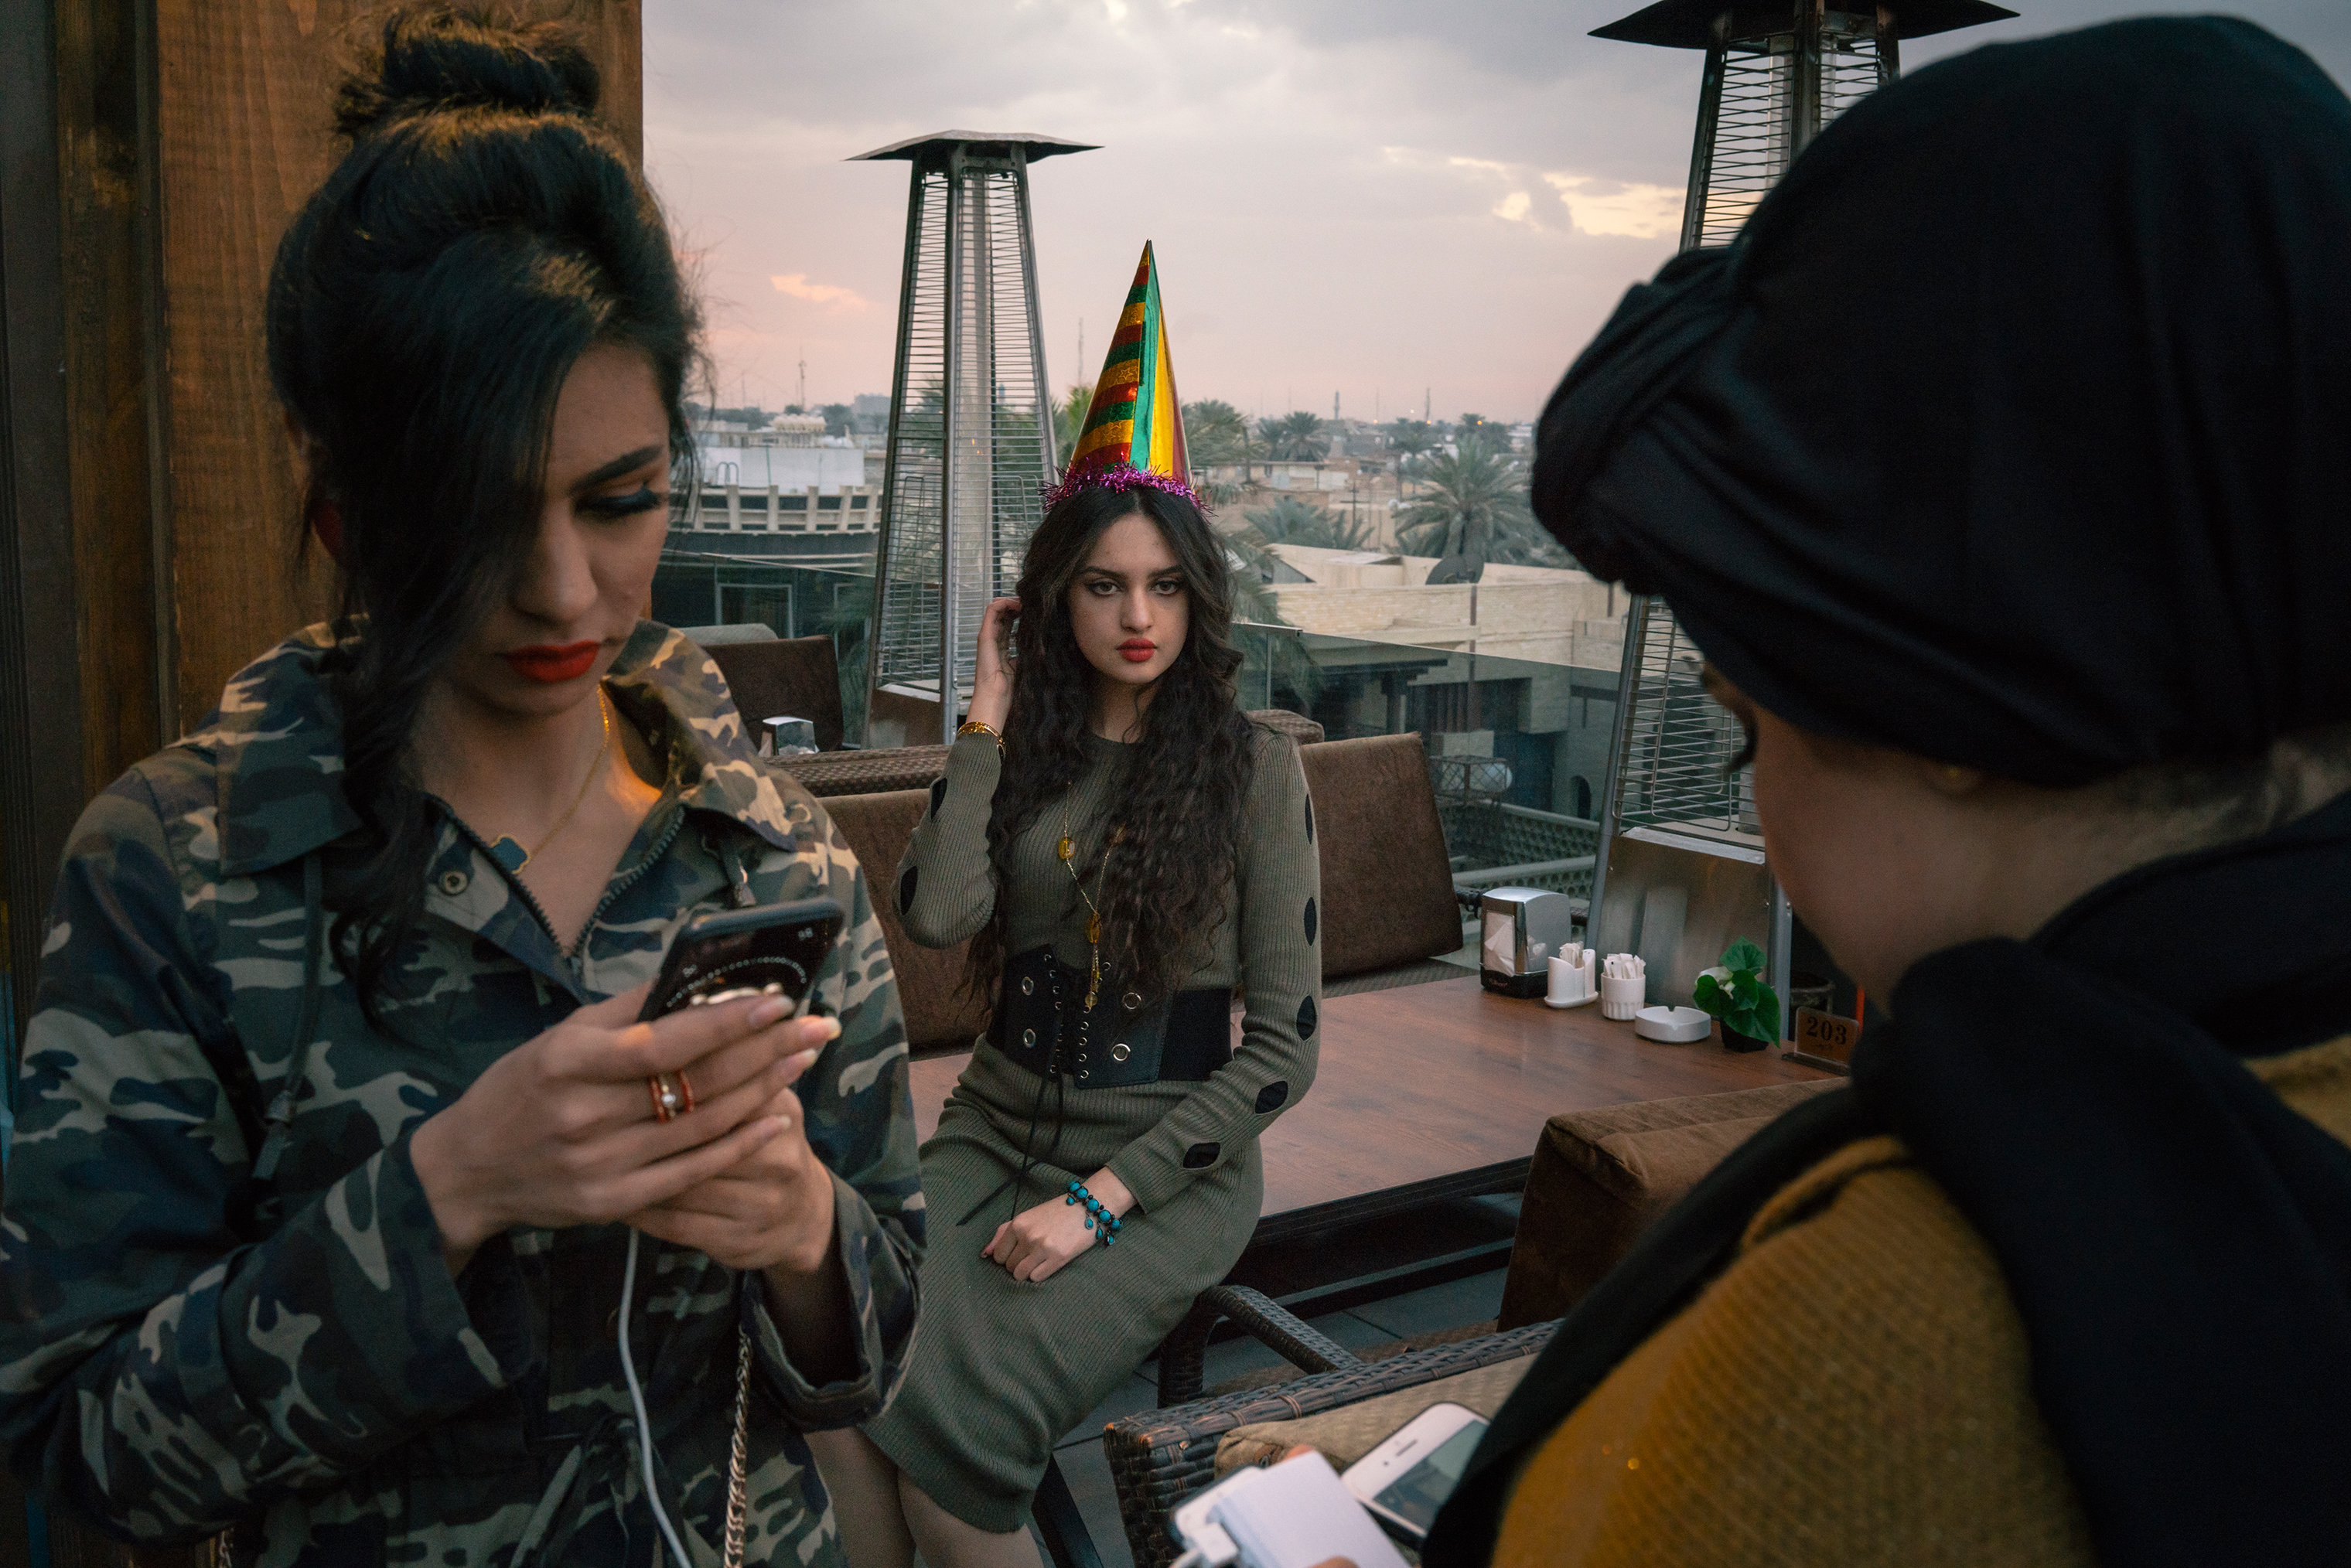 Nariman Abujahar, center, a computer engineering student, celebrates her 23rd birthday with friends on a restaurant’s rooftop terrace in the Mansour district of Baghdad on Jan. 27. (Emanuele Satolli for TIME)